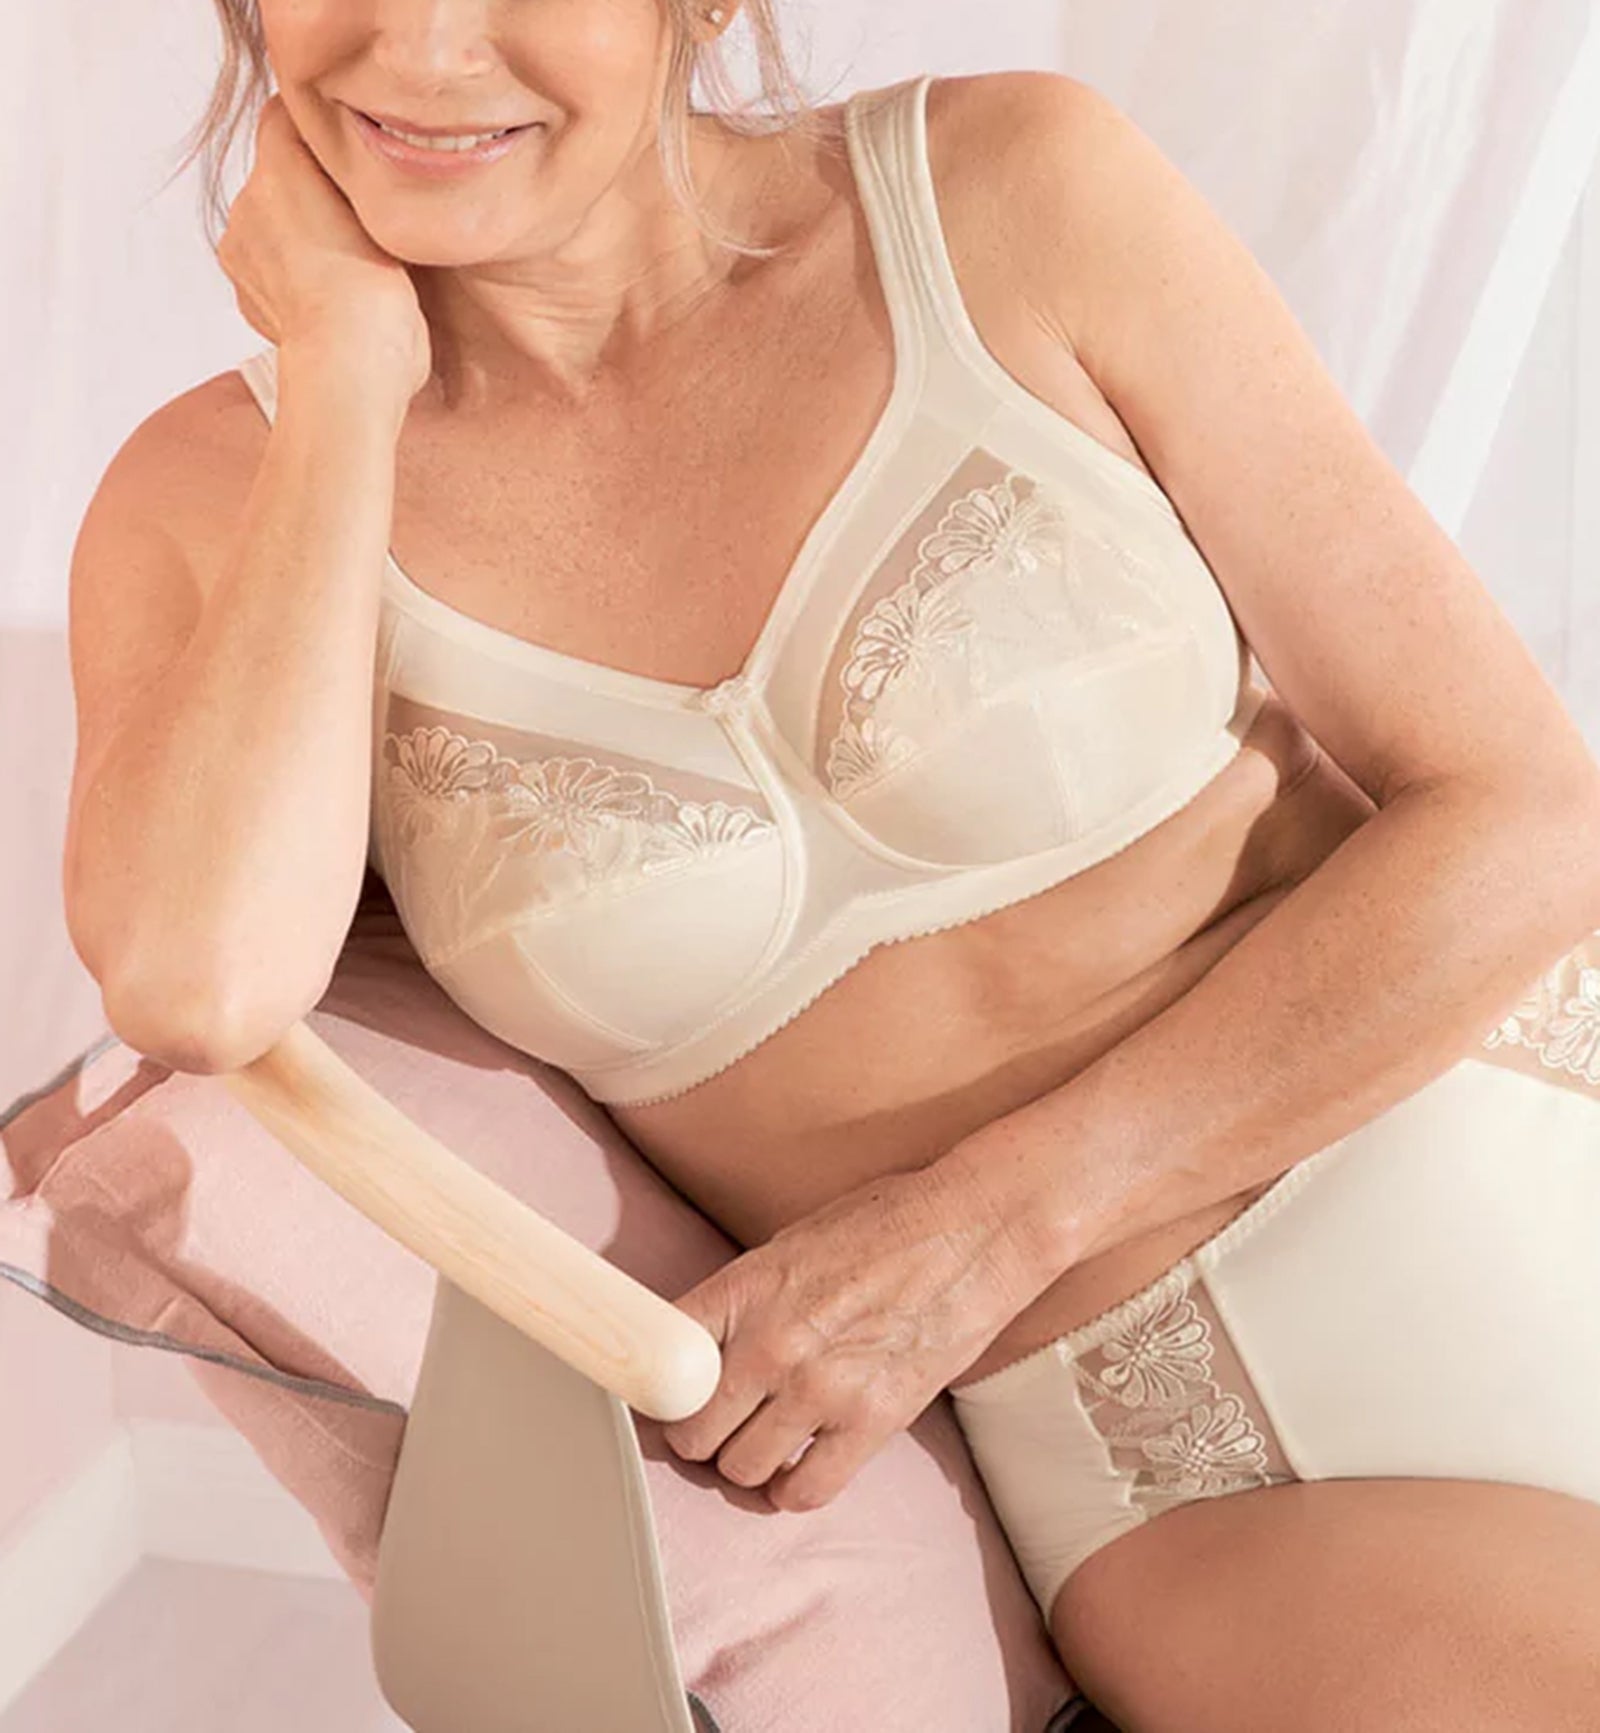 Safina Embroidered Wire-free Mastectomy Bra by Anita